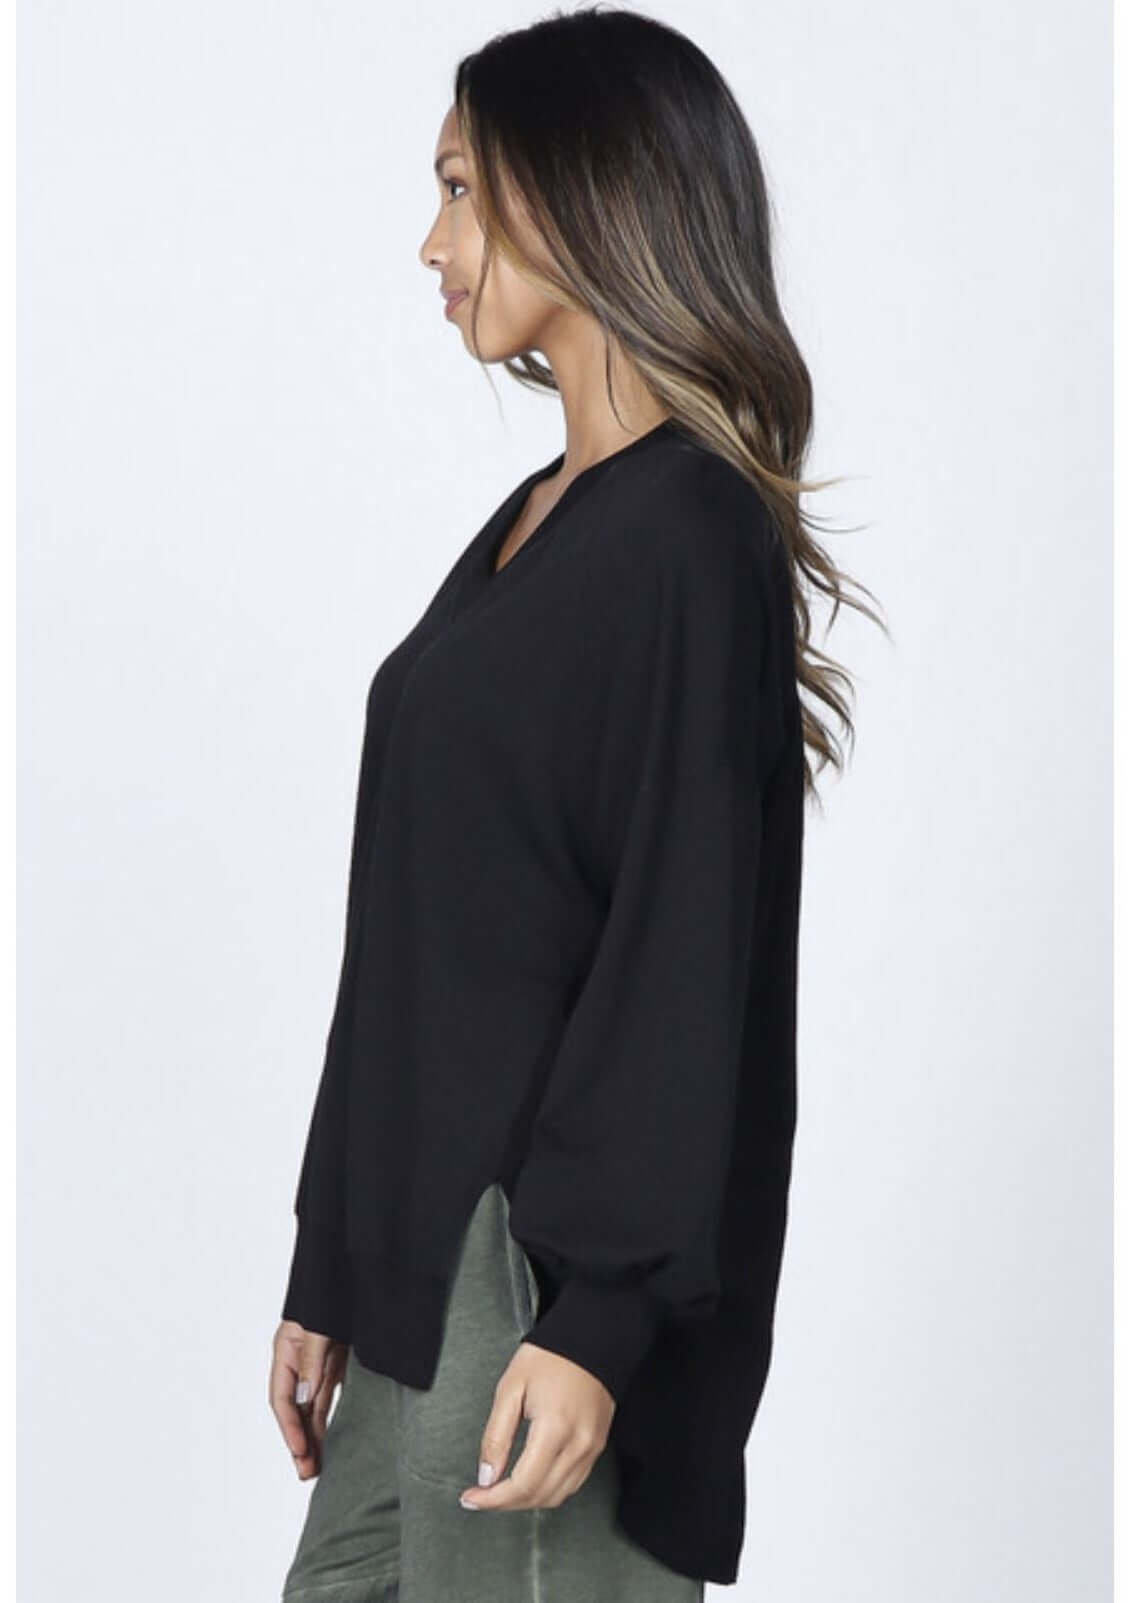 USA Made M. Rena French Terry V-Neck Tunic with Woven Back Contrast Panel in Black |  M. Rena Style# S5309 | Women's Made in America Clothing